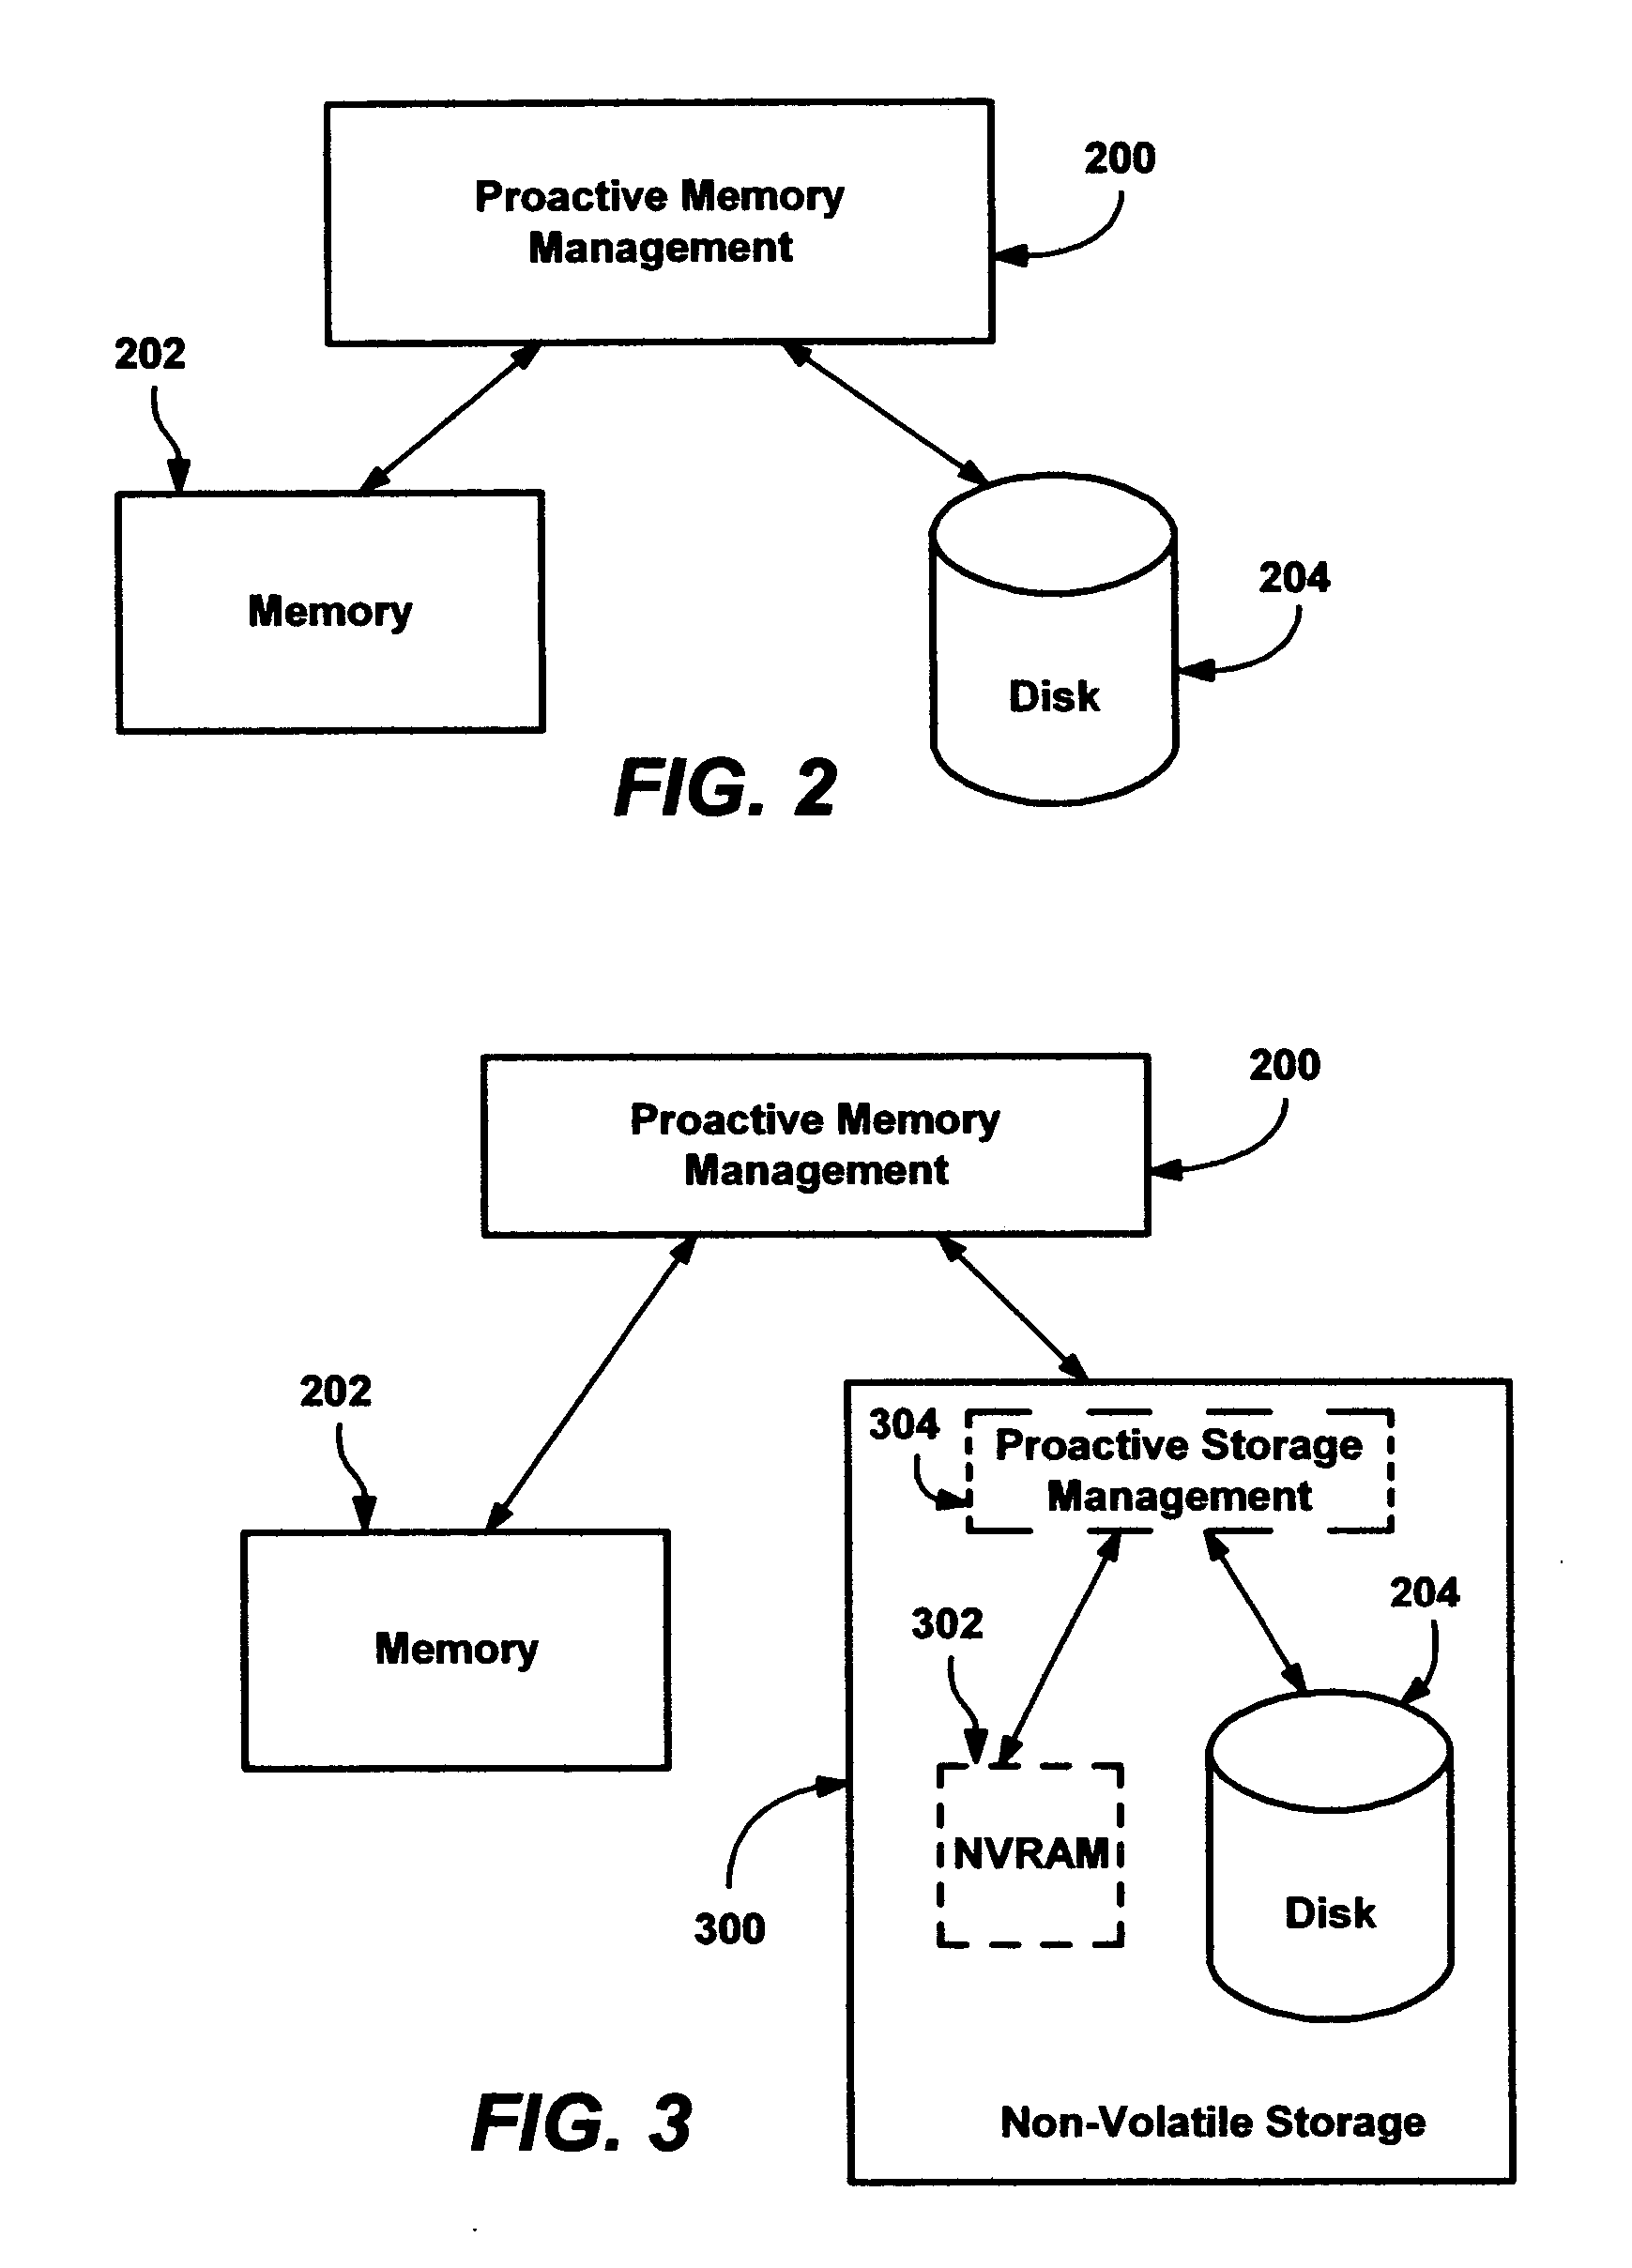 Methods and mechanisms for proactive memory management